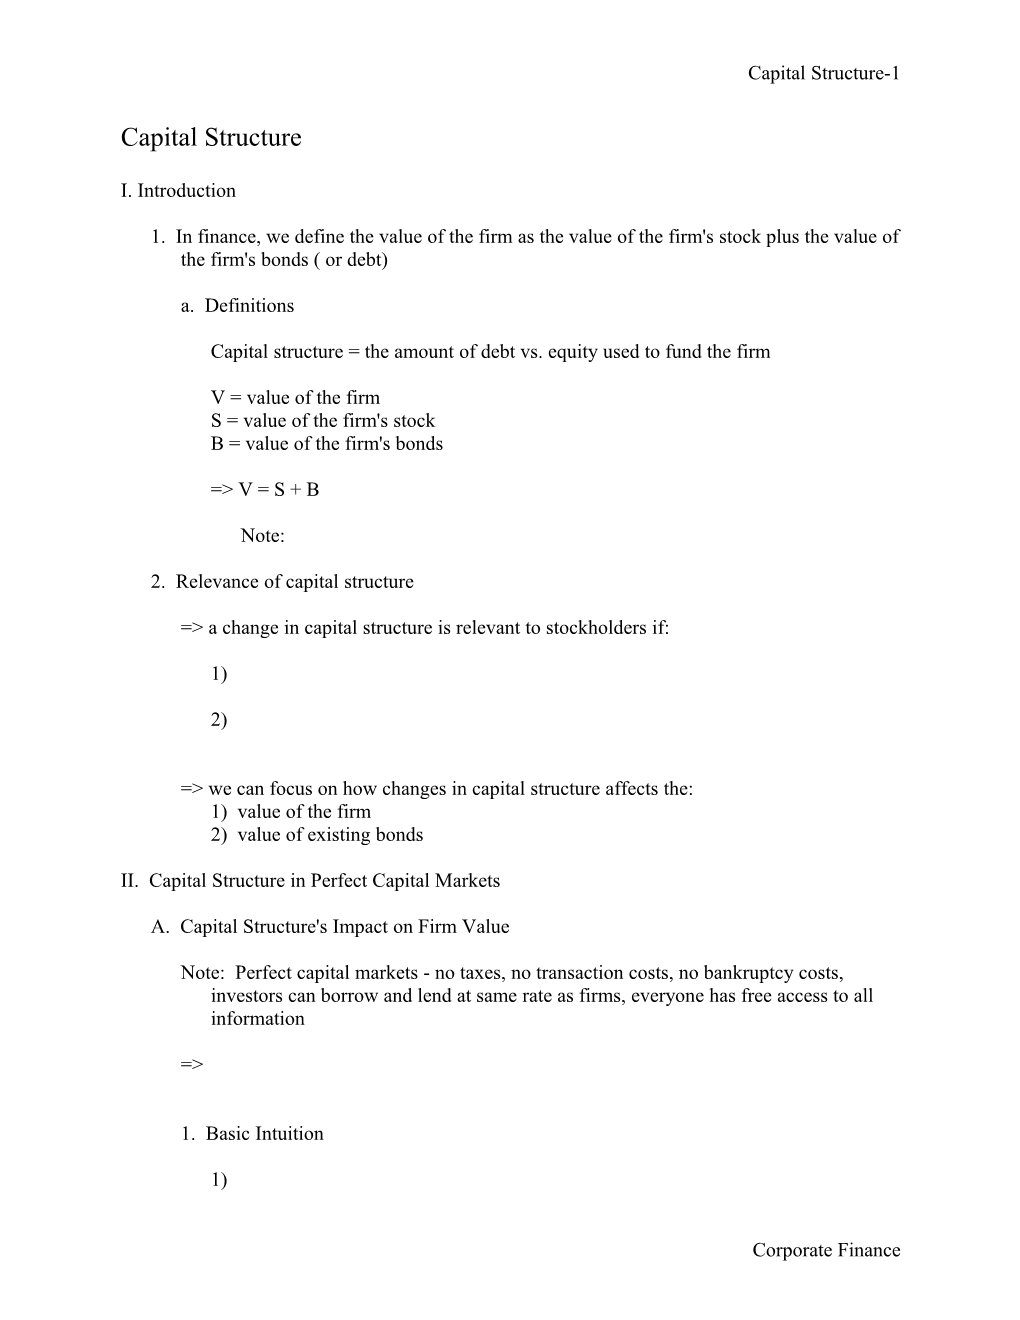 Chapter 17 - Capital Structure (Part I)